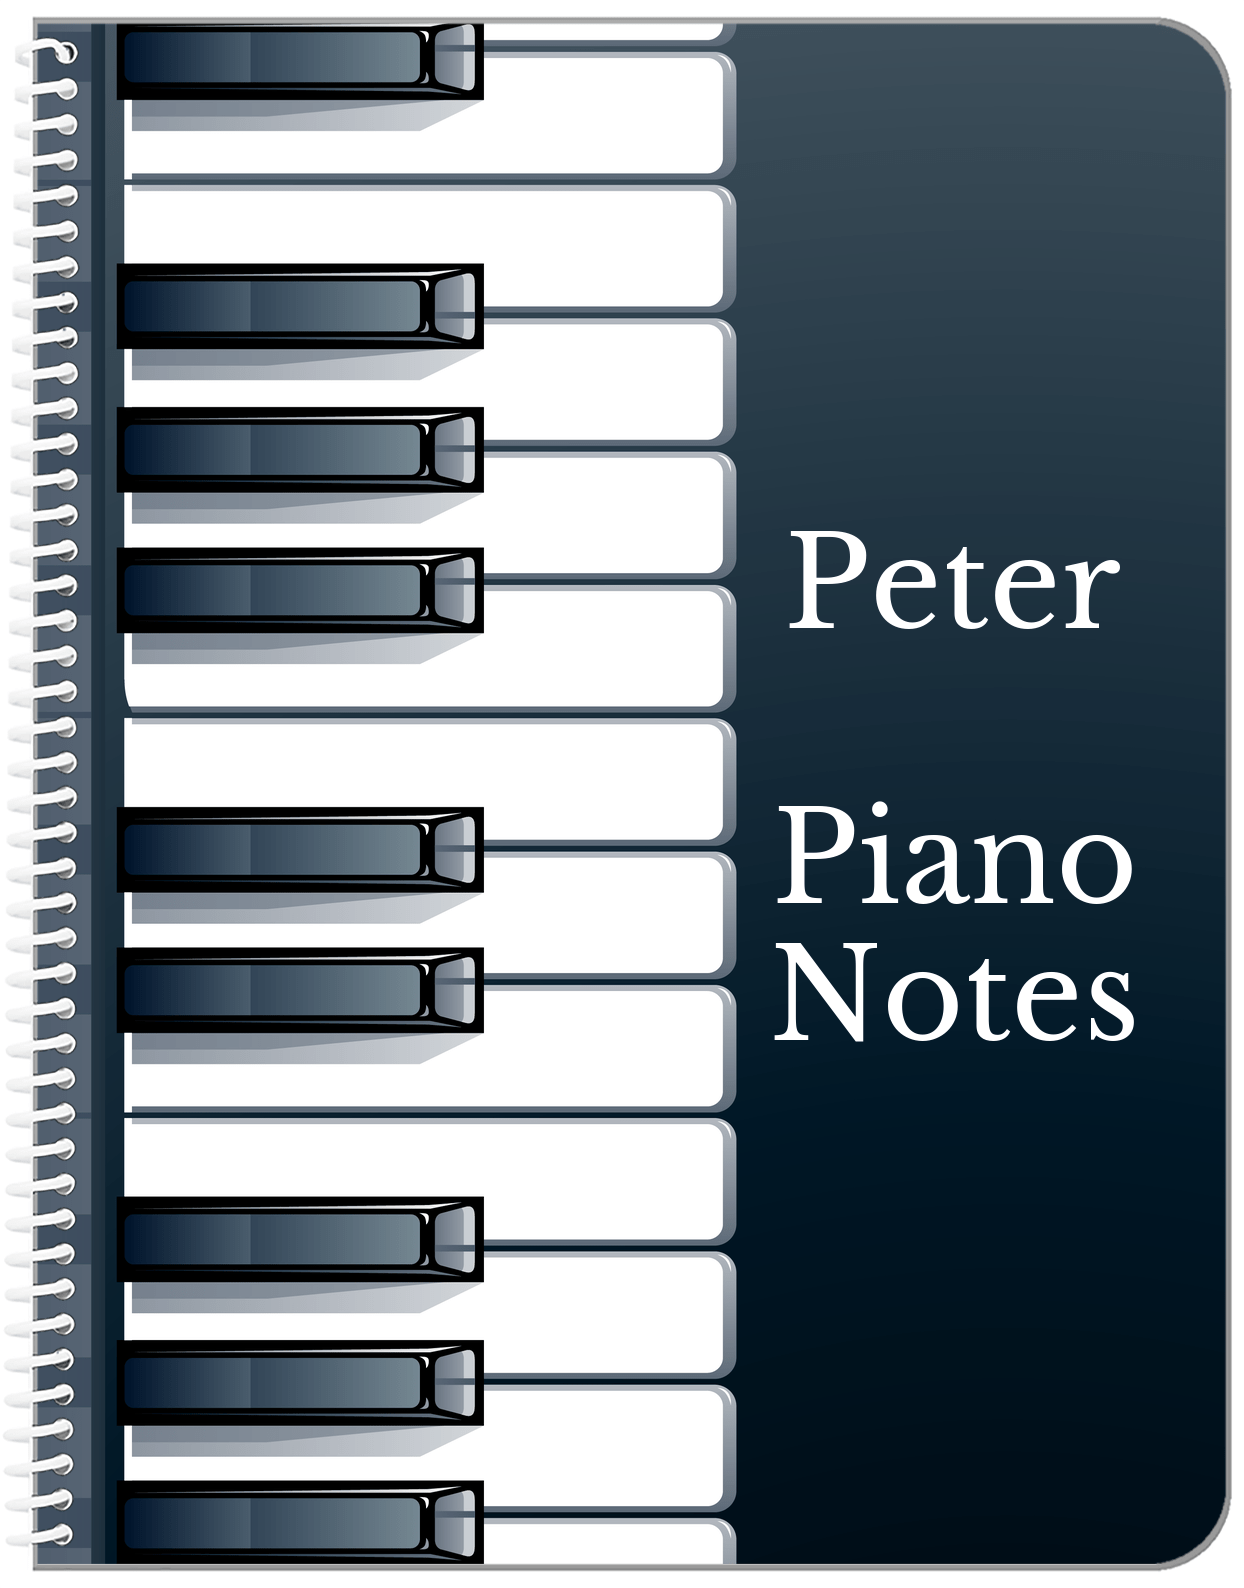 Personalized Piano Keys Notebook - Black Background I - Front View